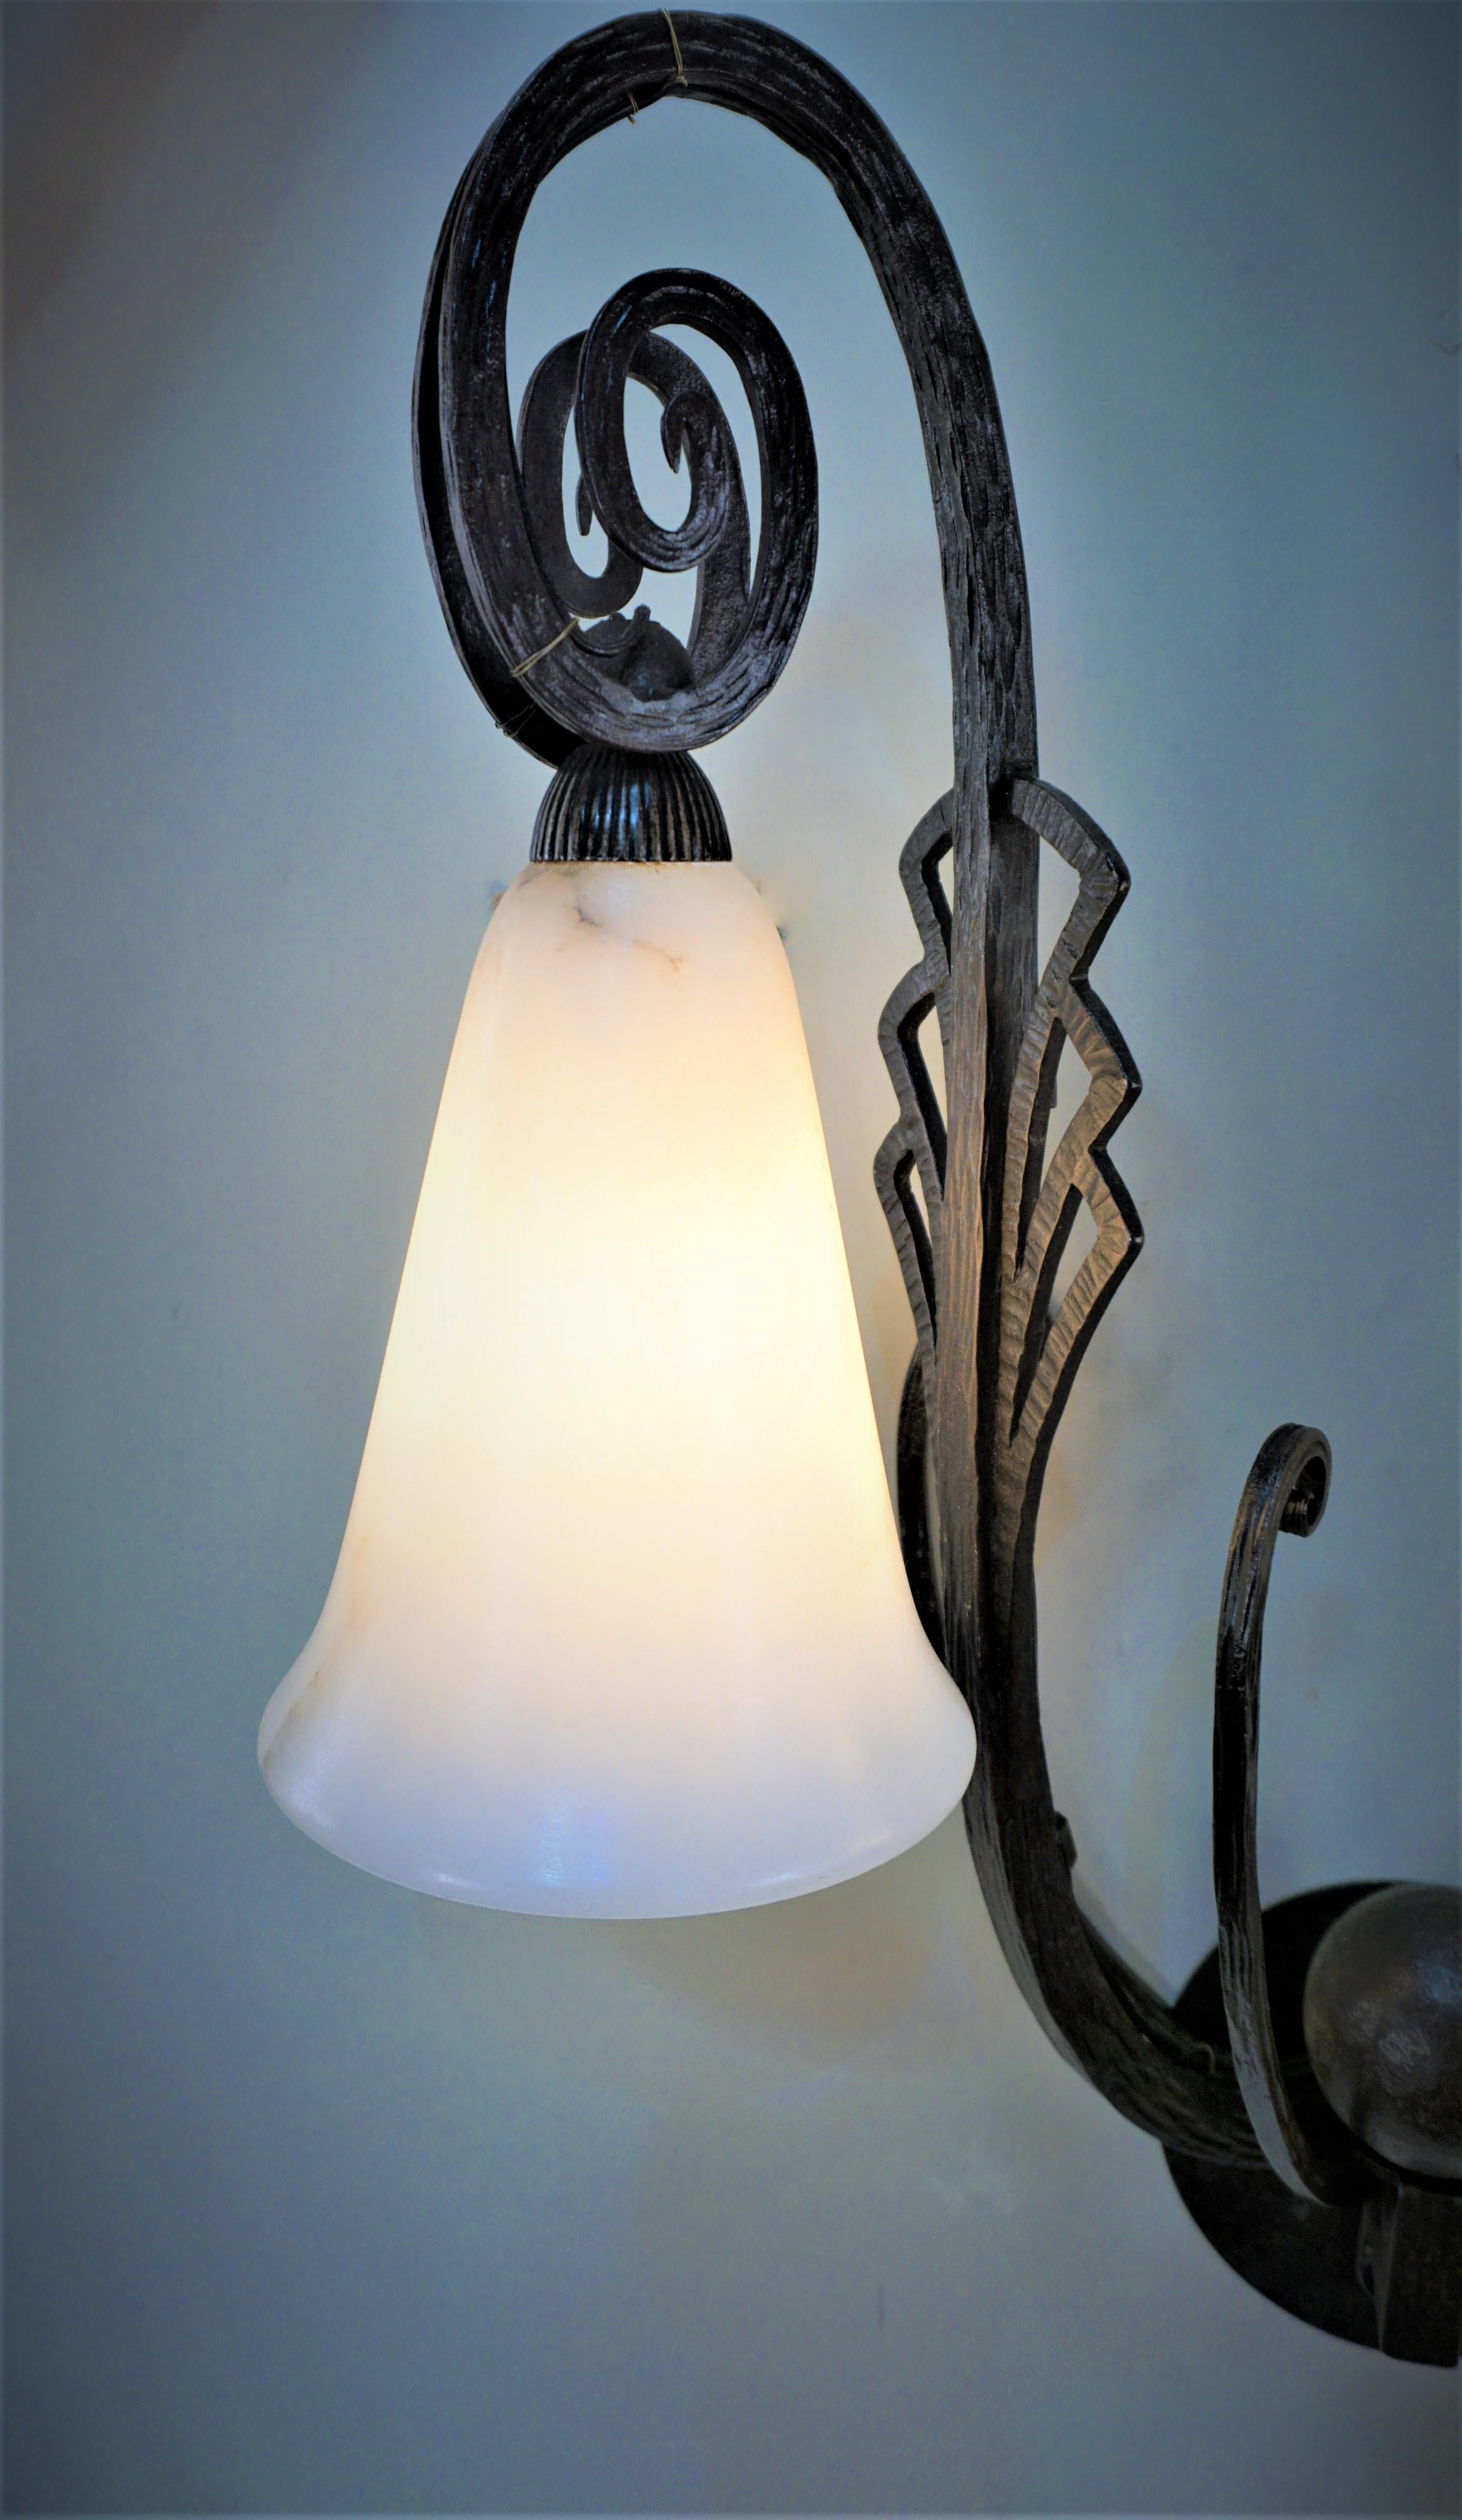 Elegant wrought iron wall sconce with alabaster shades.
Signed Edgar Brandt.